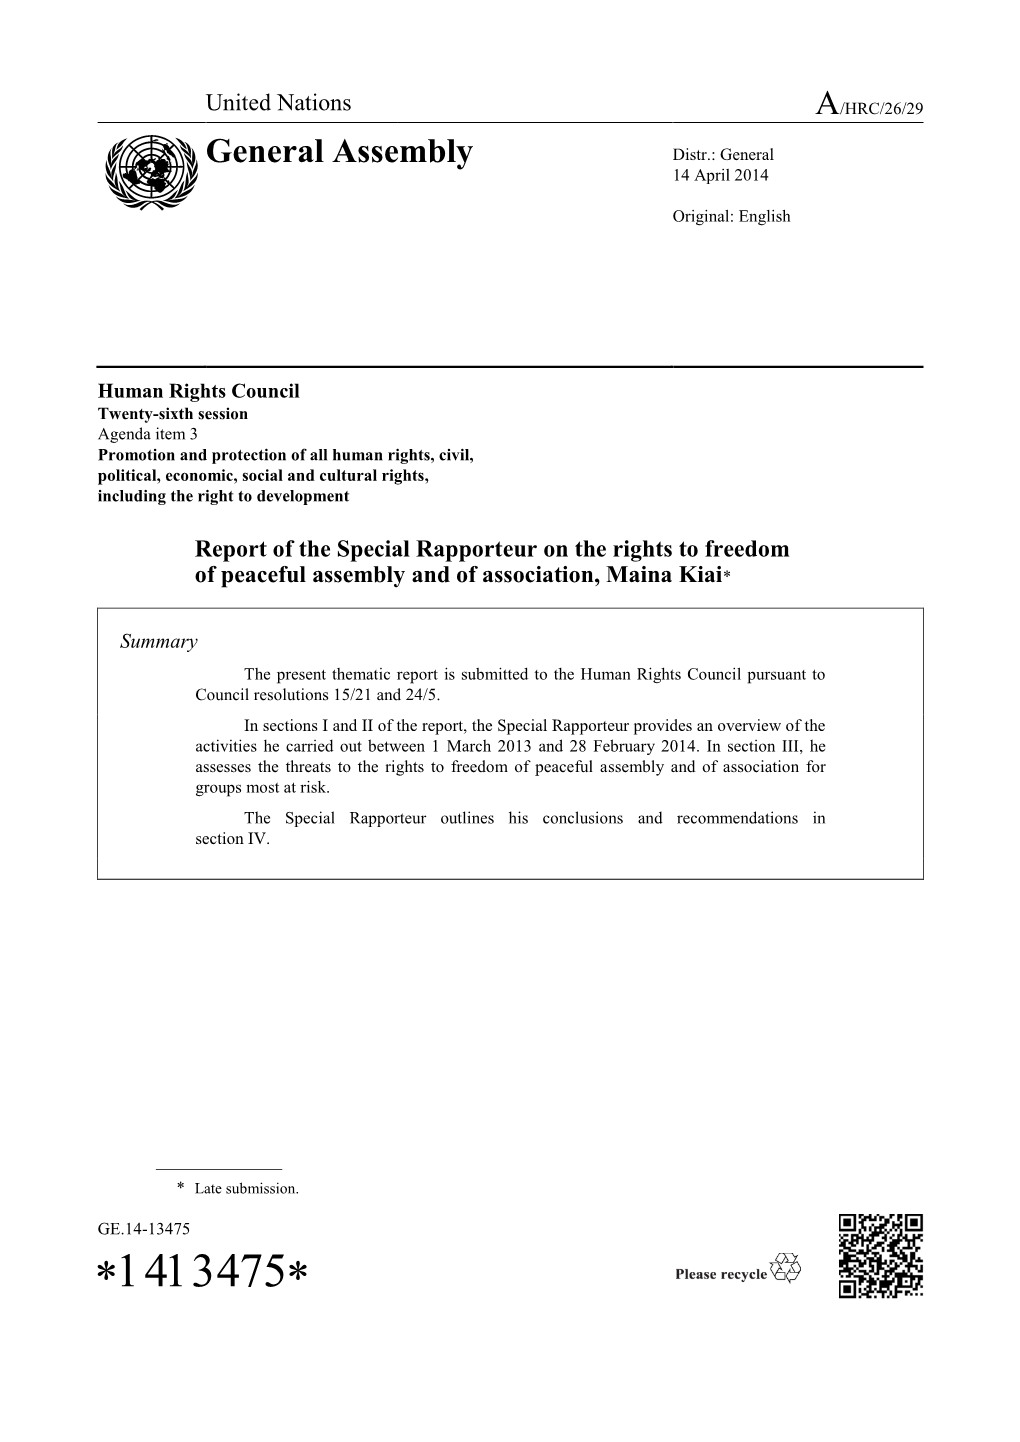 Report of the Special Rapporteur on the Rights to Freedom of Peaceful Assembly and of Association, Maina Kiai*